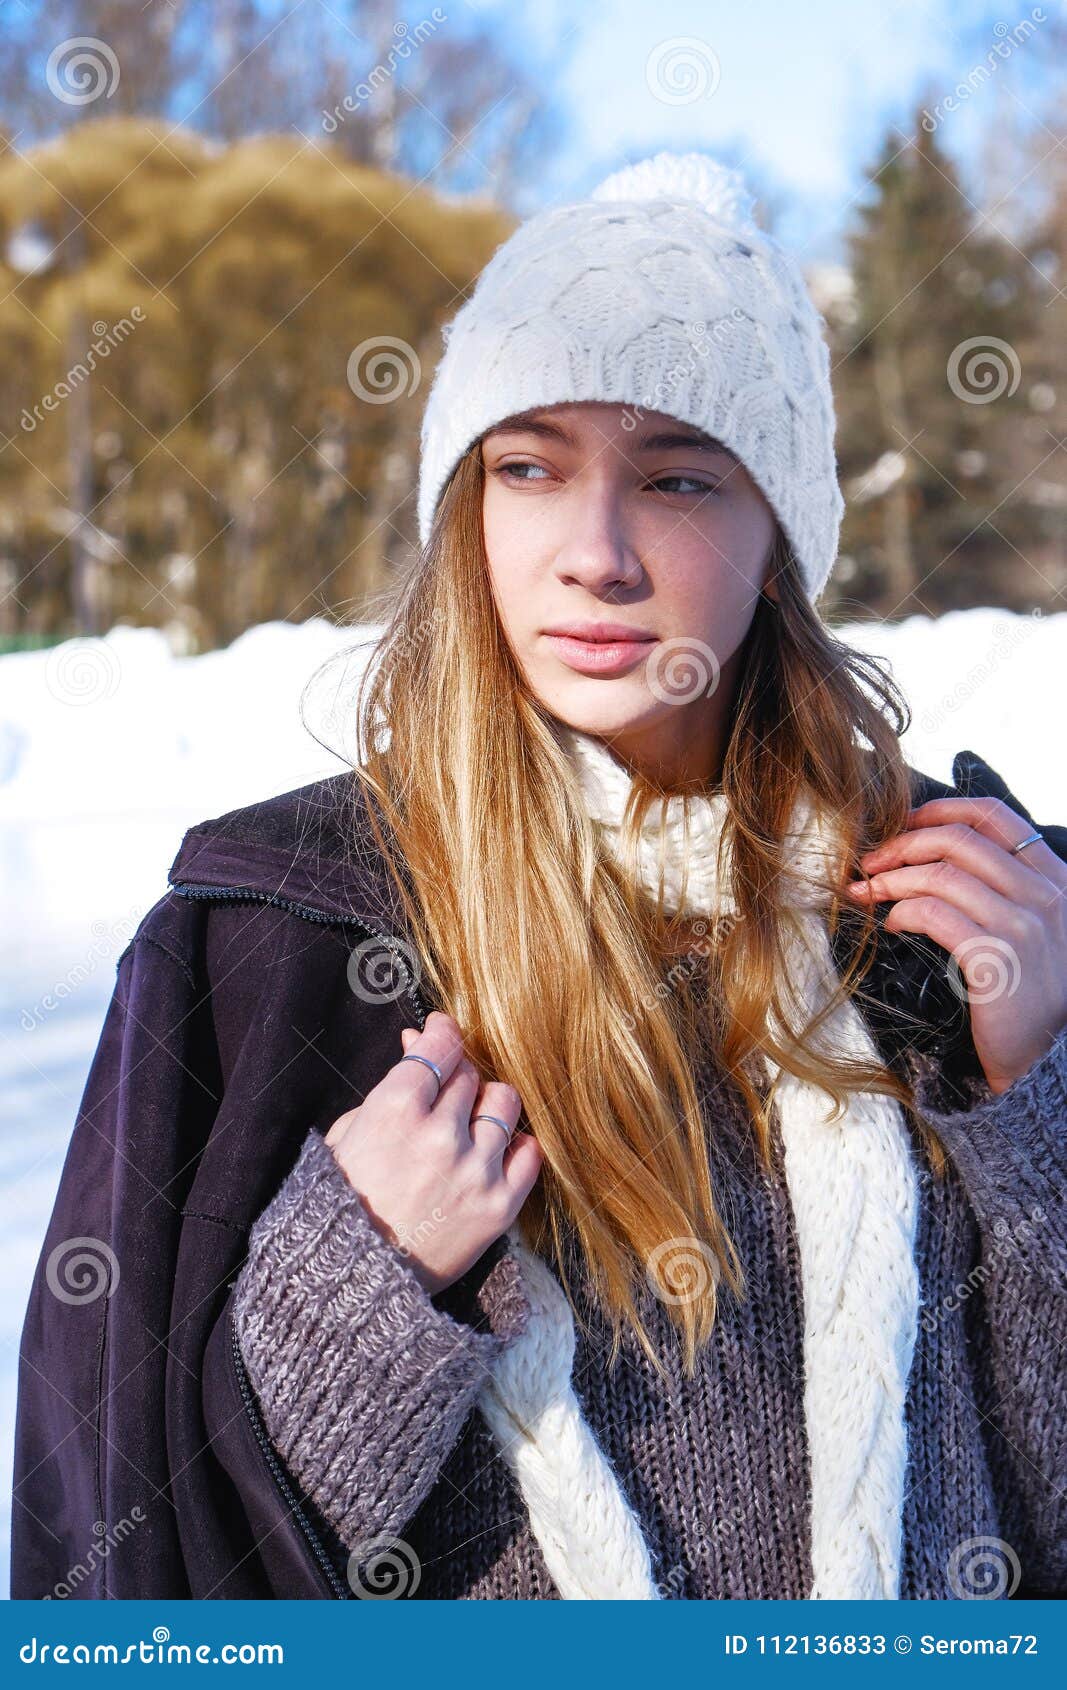 Winter Portrait of a Young Beautiful Girl Stock Image - Image of ...